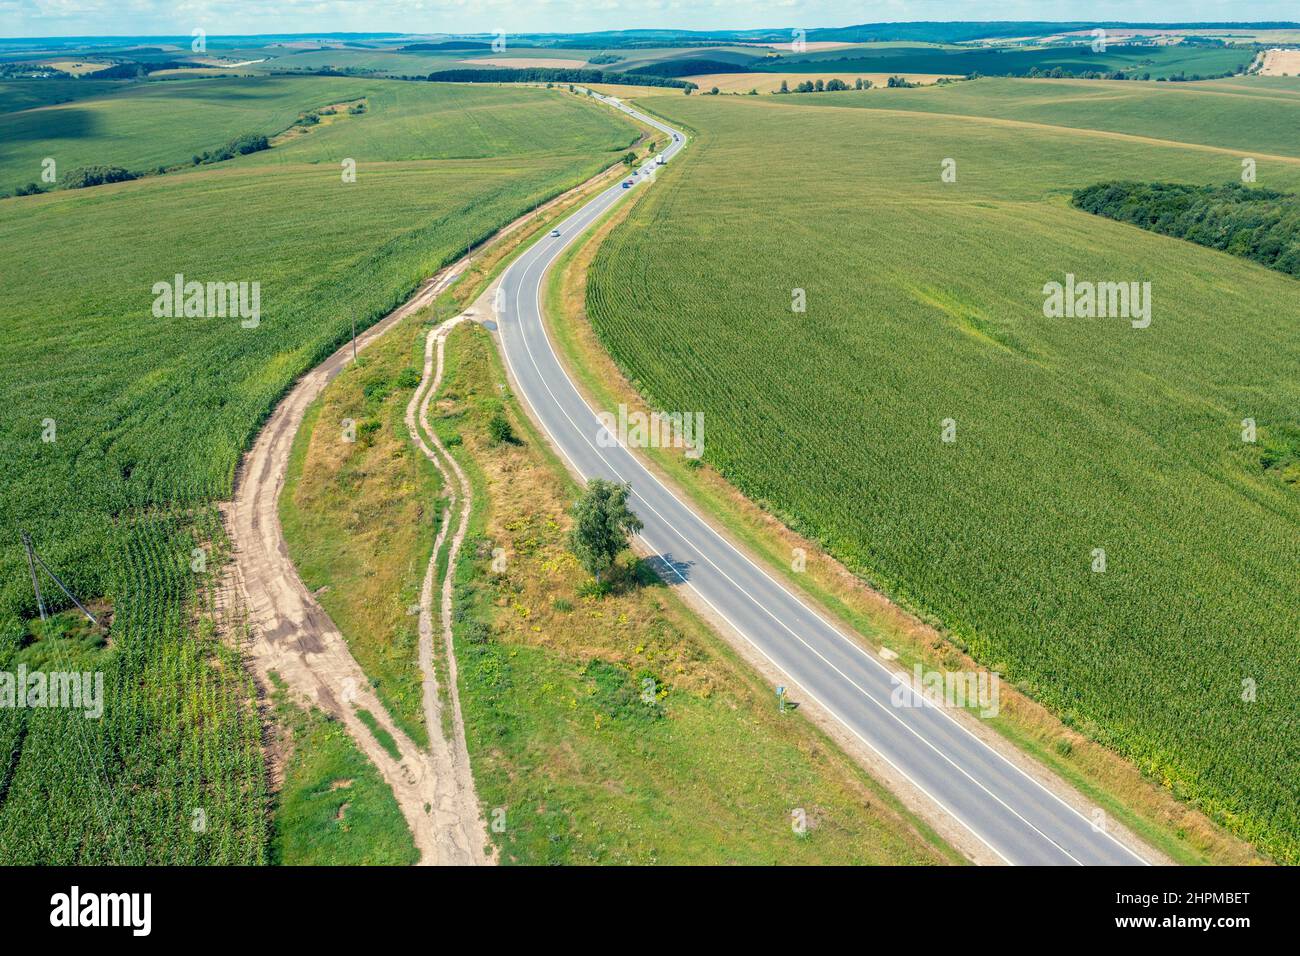 Top view of a highway among cultivated agricultural fields. Rural landscape in summer Stock Photo